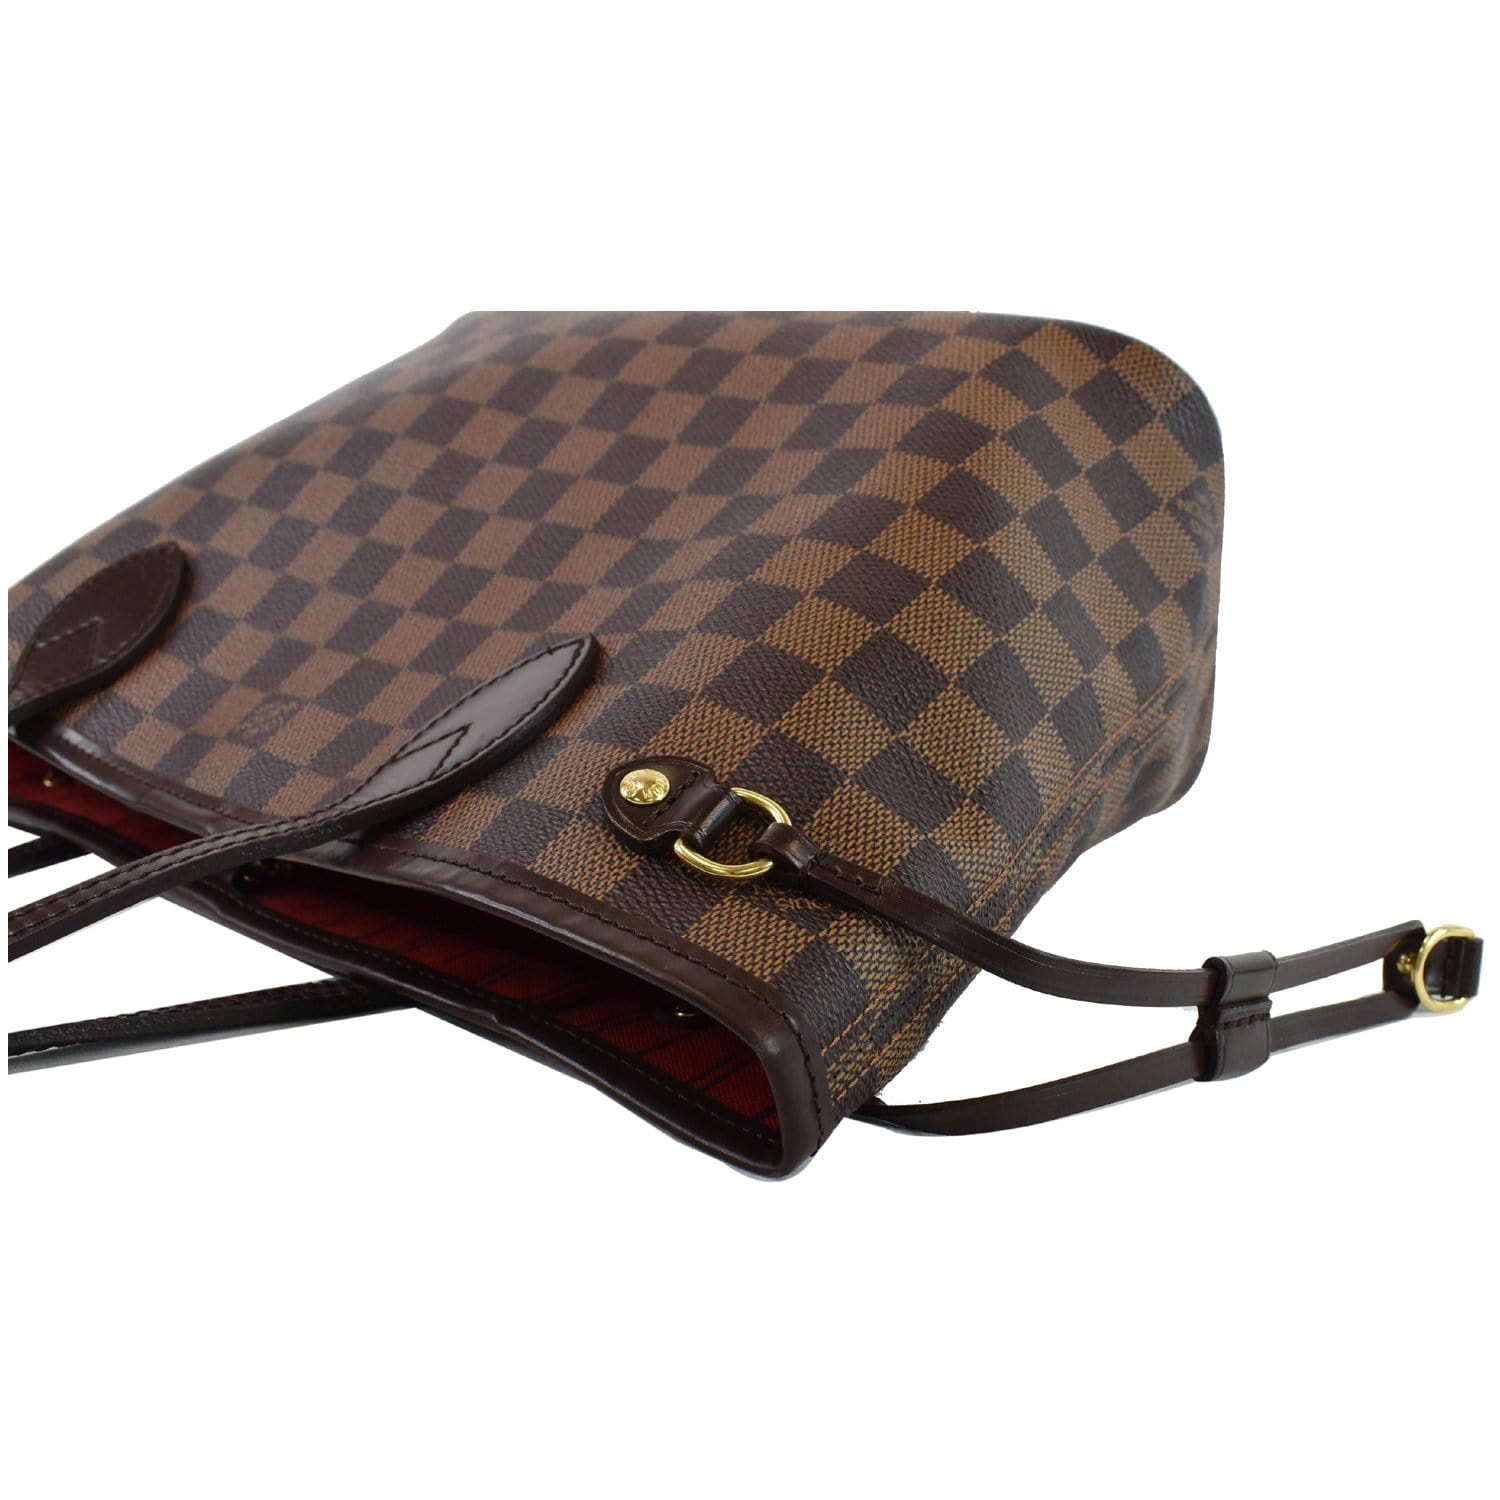 Louis Vuitton Neverfull Damier Ebene Pm 21l69 Brown Coated Canvas